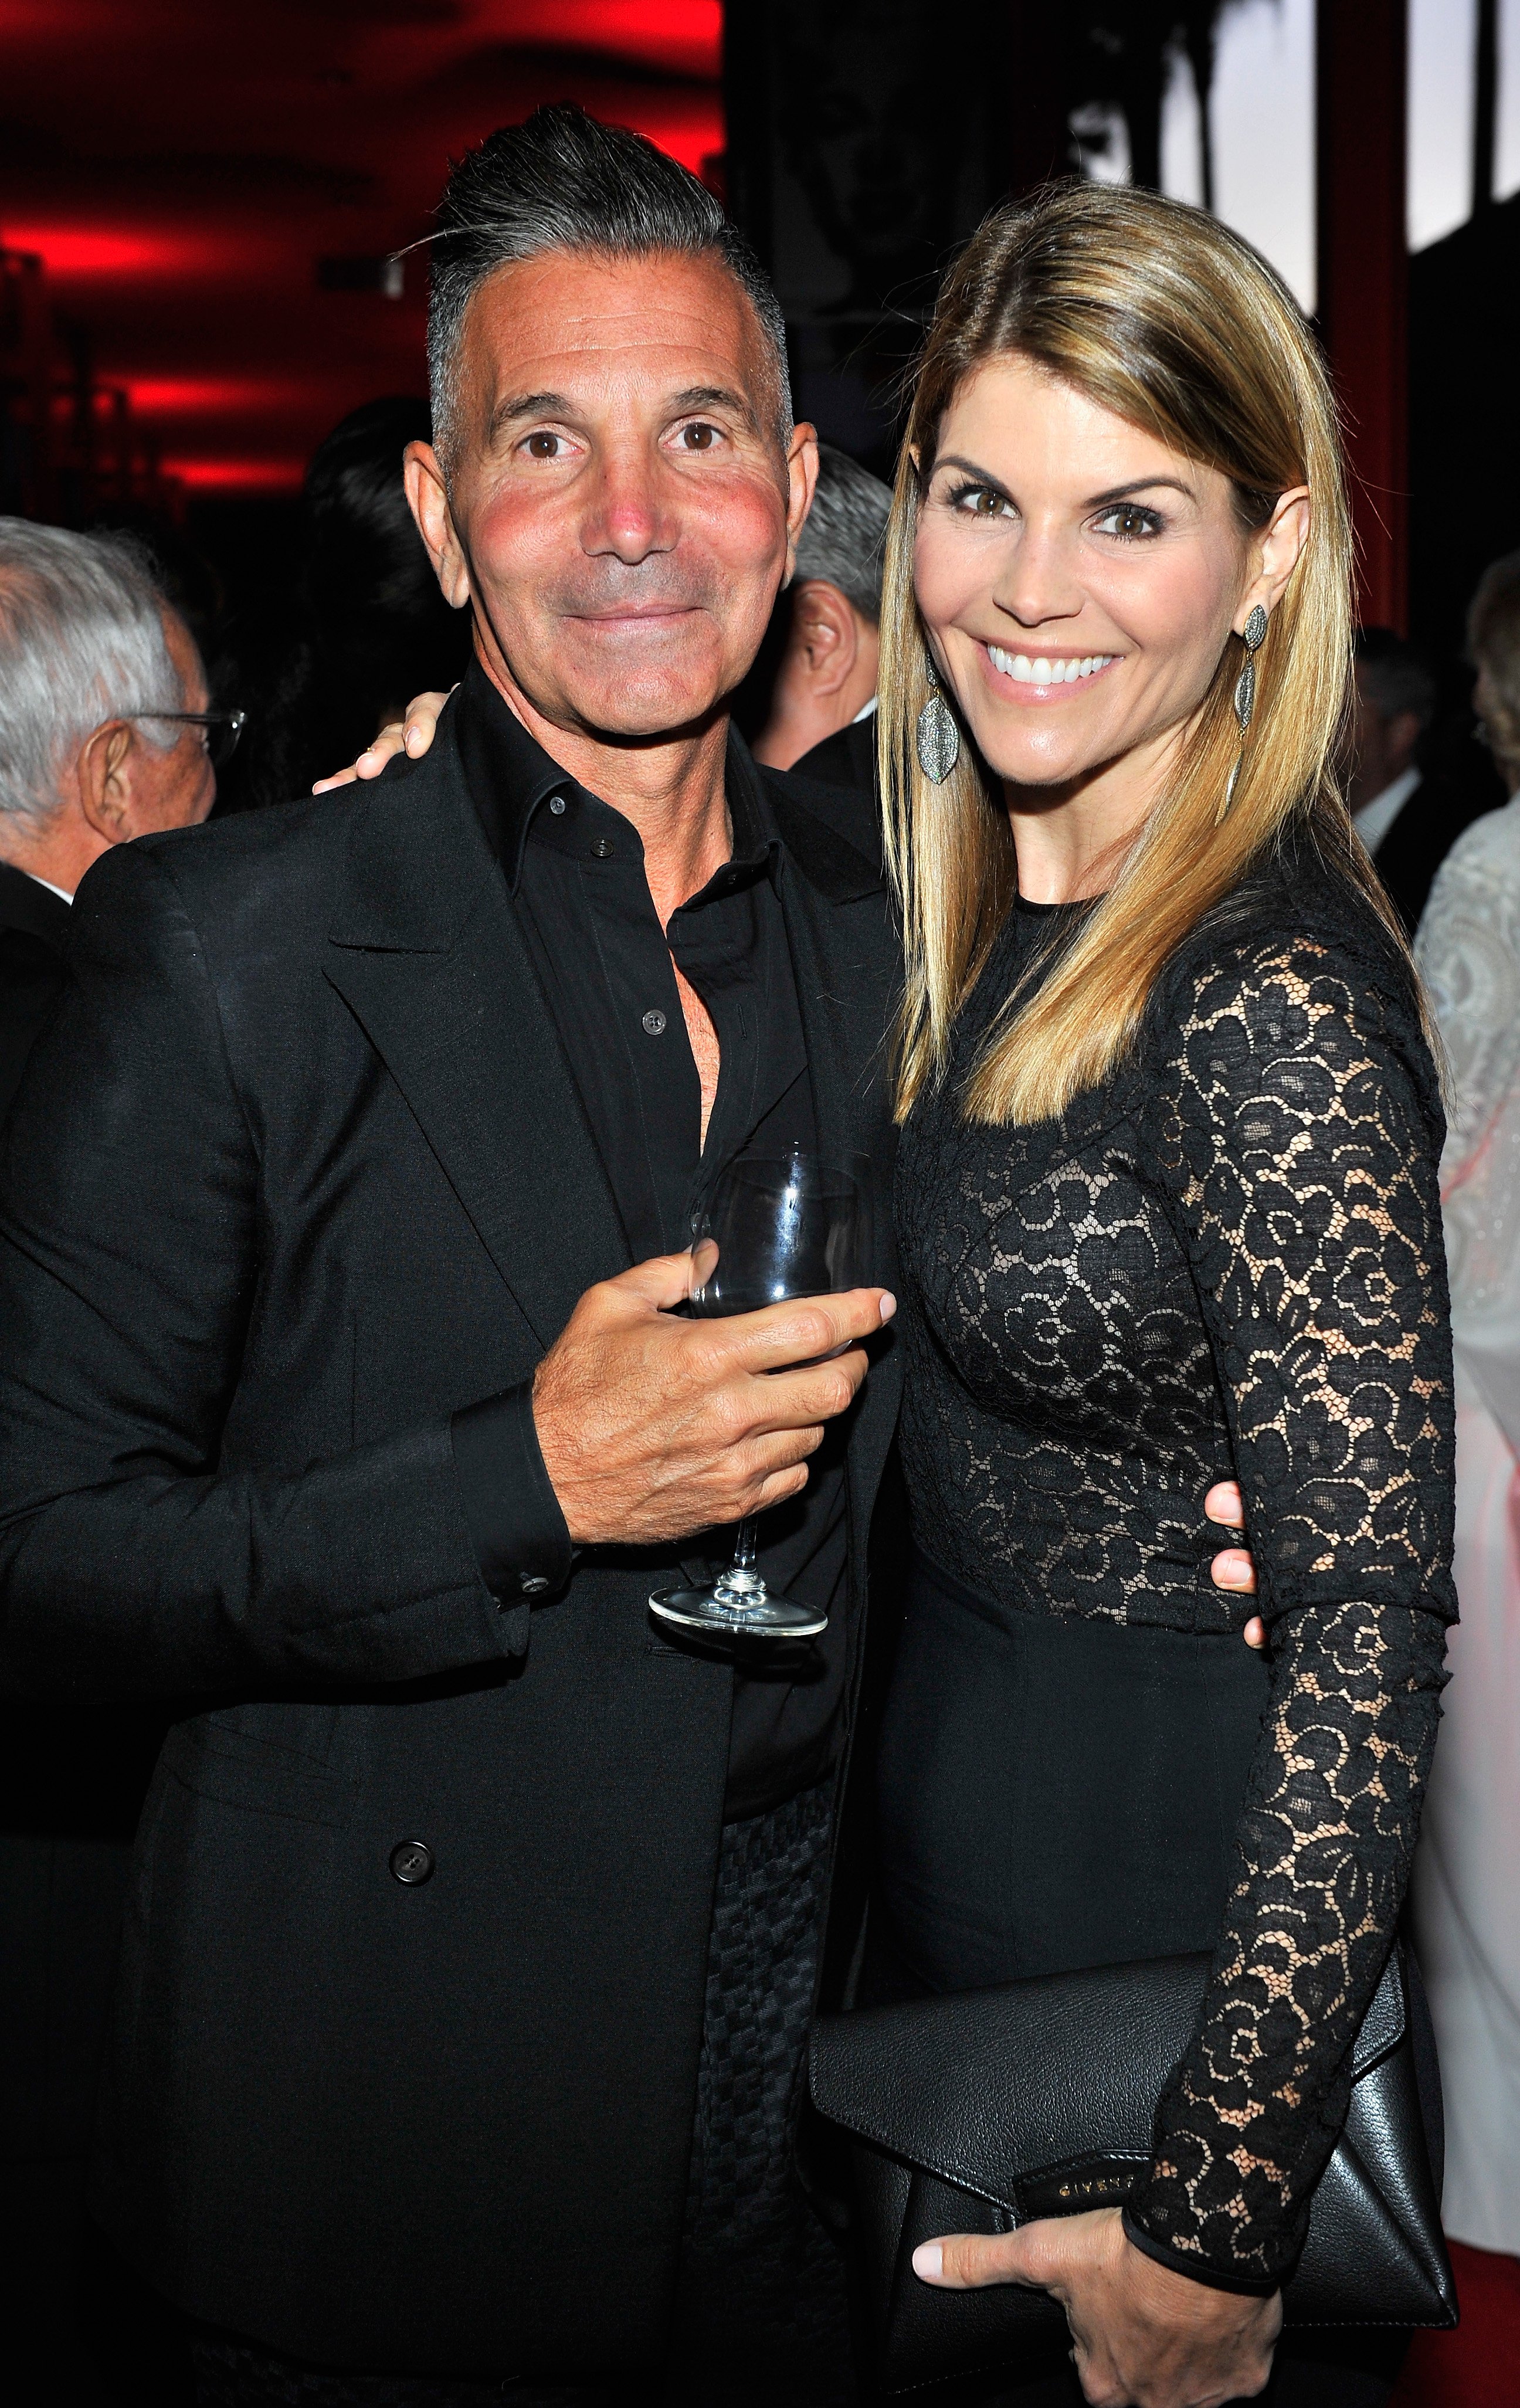 Lori Loughlin and Mossimo Giannulli spotted in Orange County, California | Photo: Getty Images